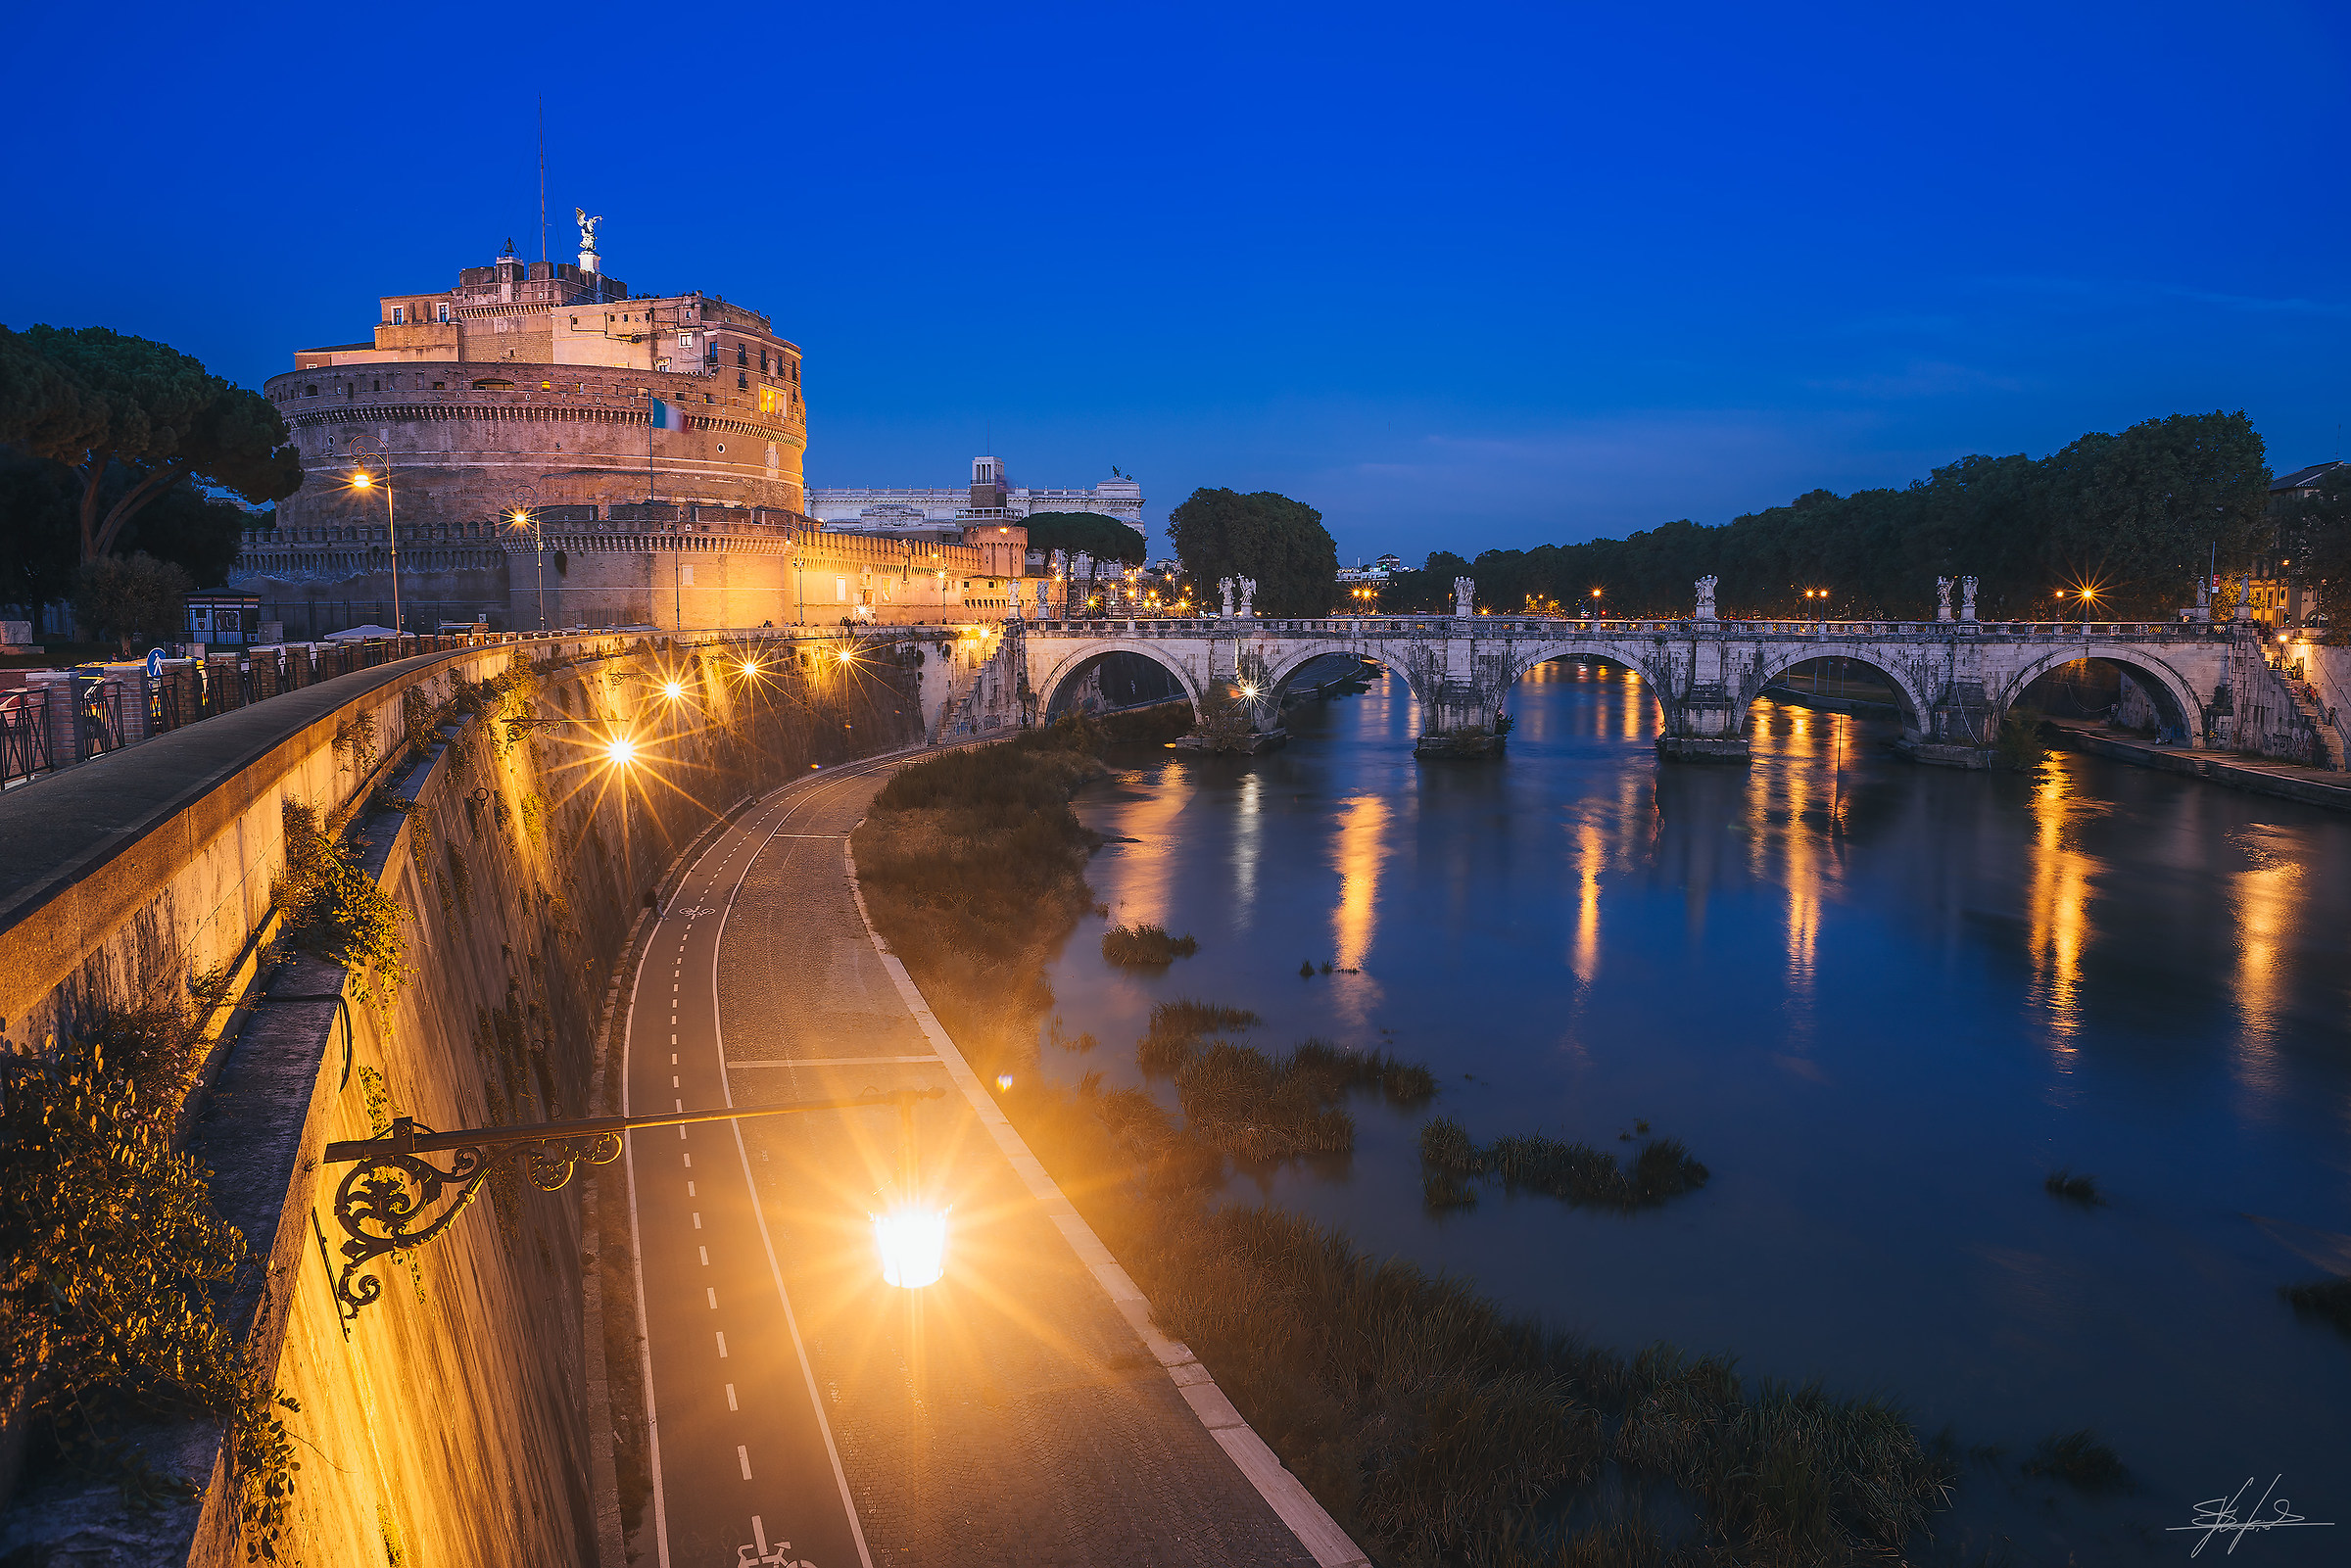 The Tiber River and Castel Sant'Angelo...